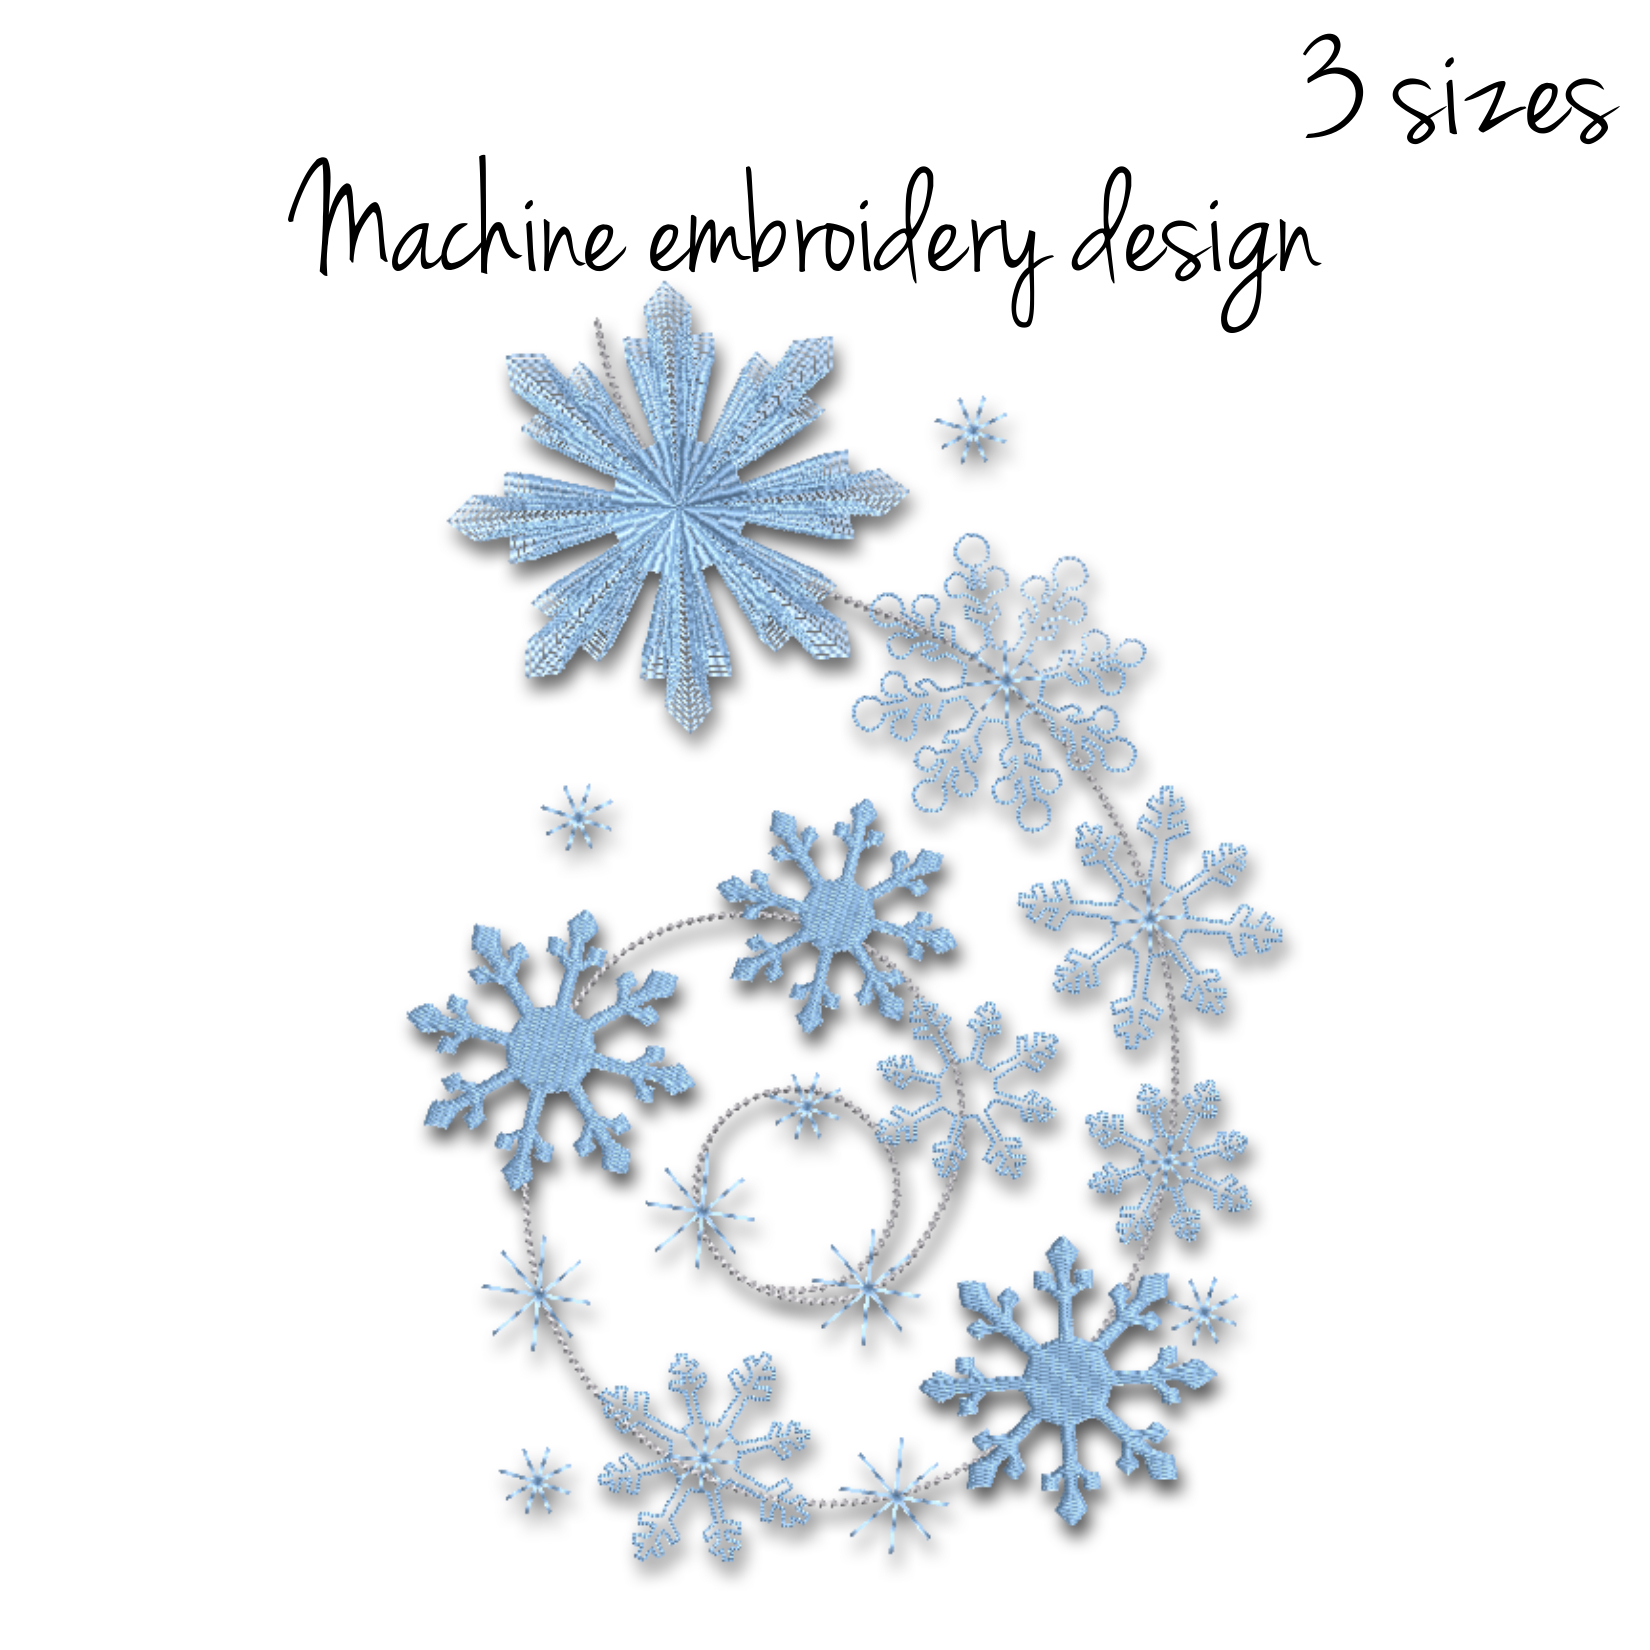 Snowflake Embroidery Pattern Snowflake Embroidery Machine Designs Winter Digital Instant Download Pattern Hoop Pes File